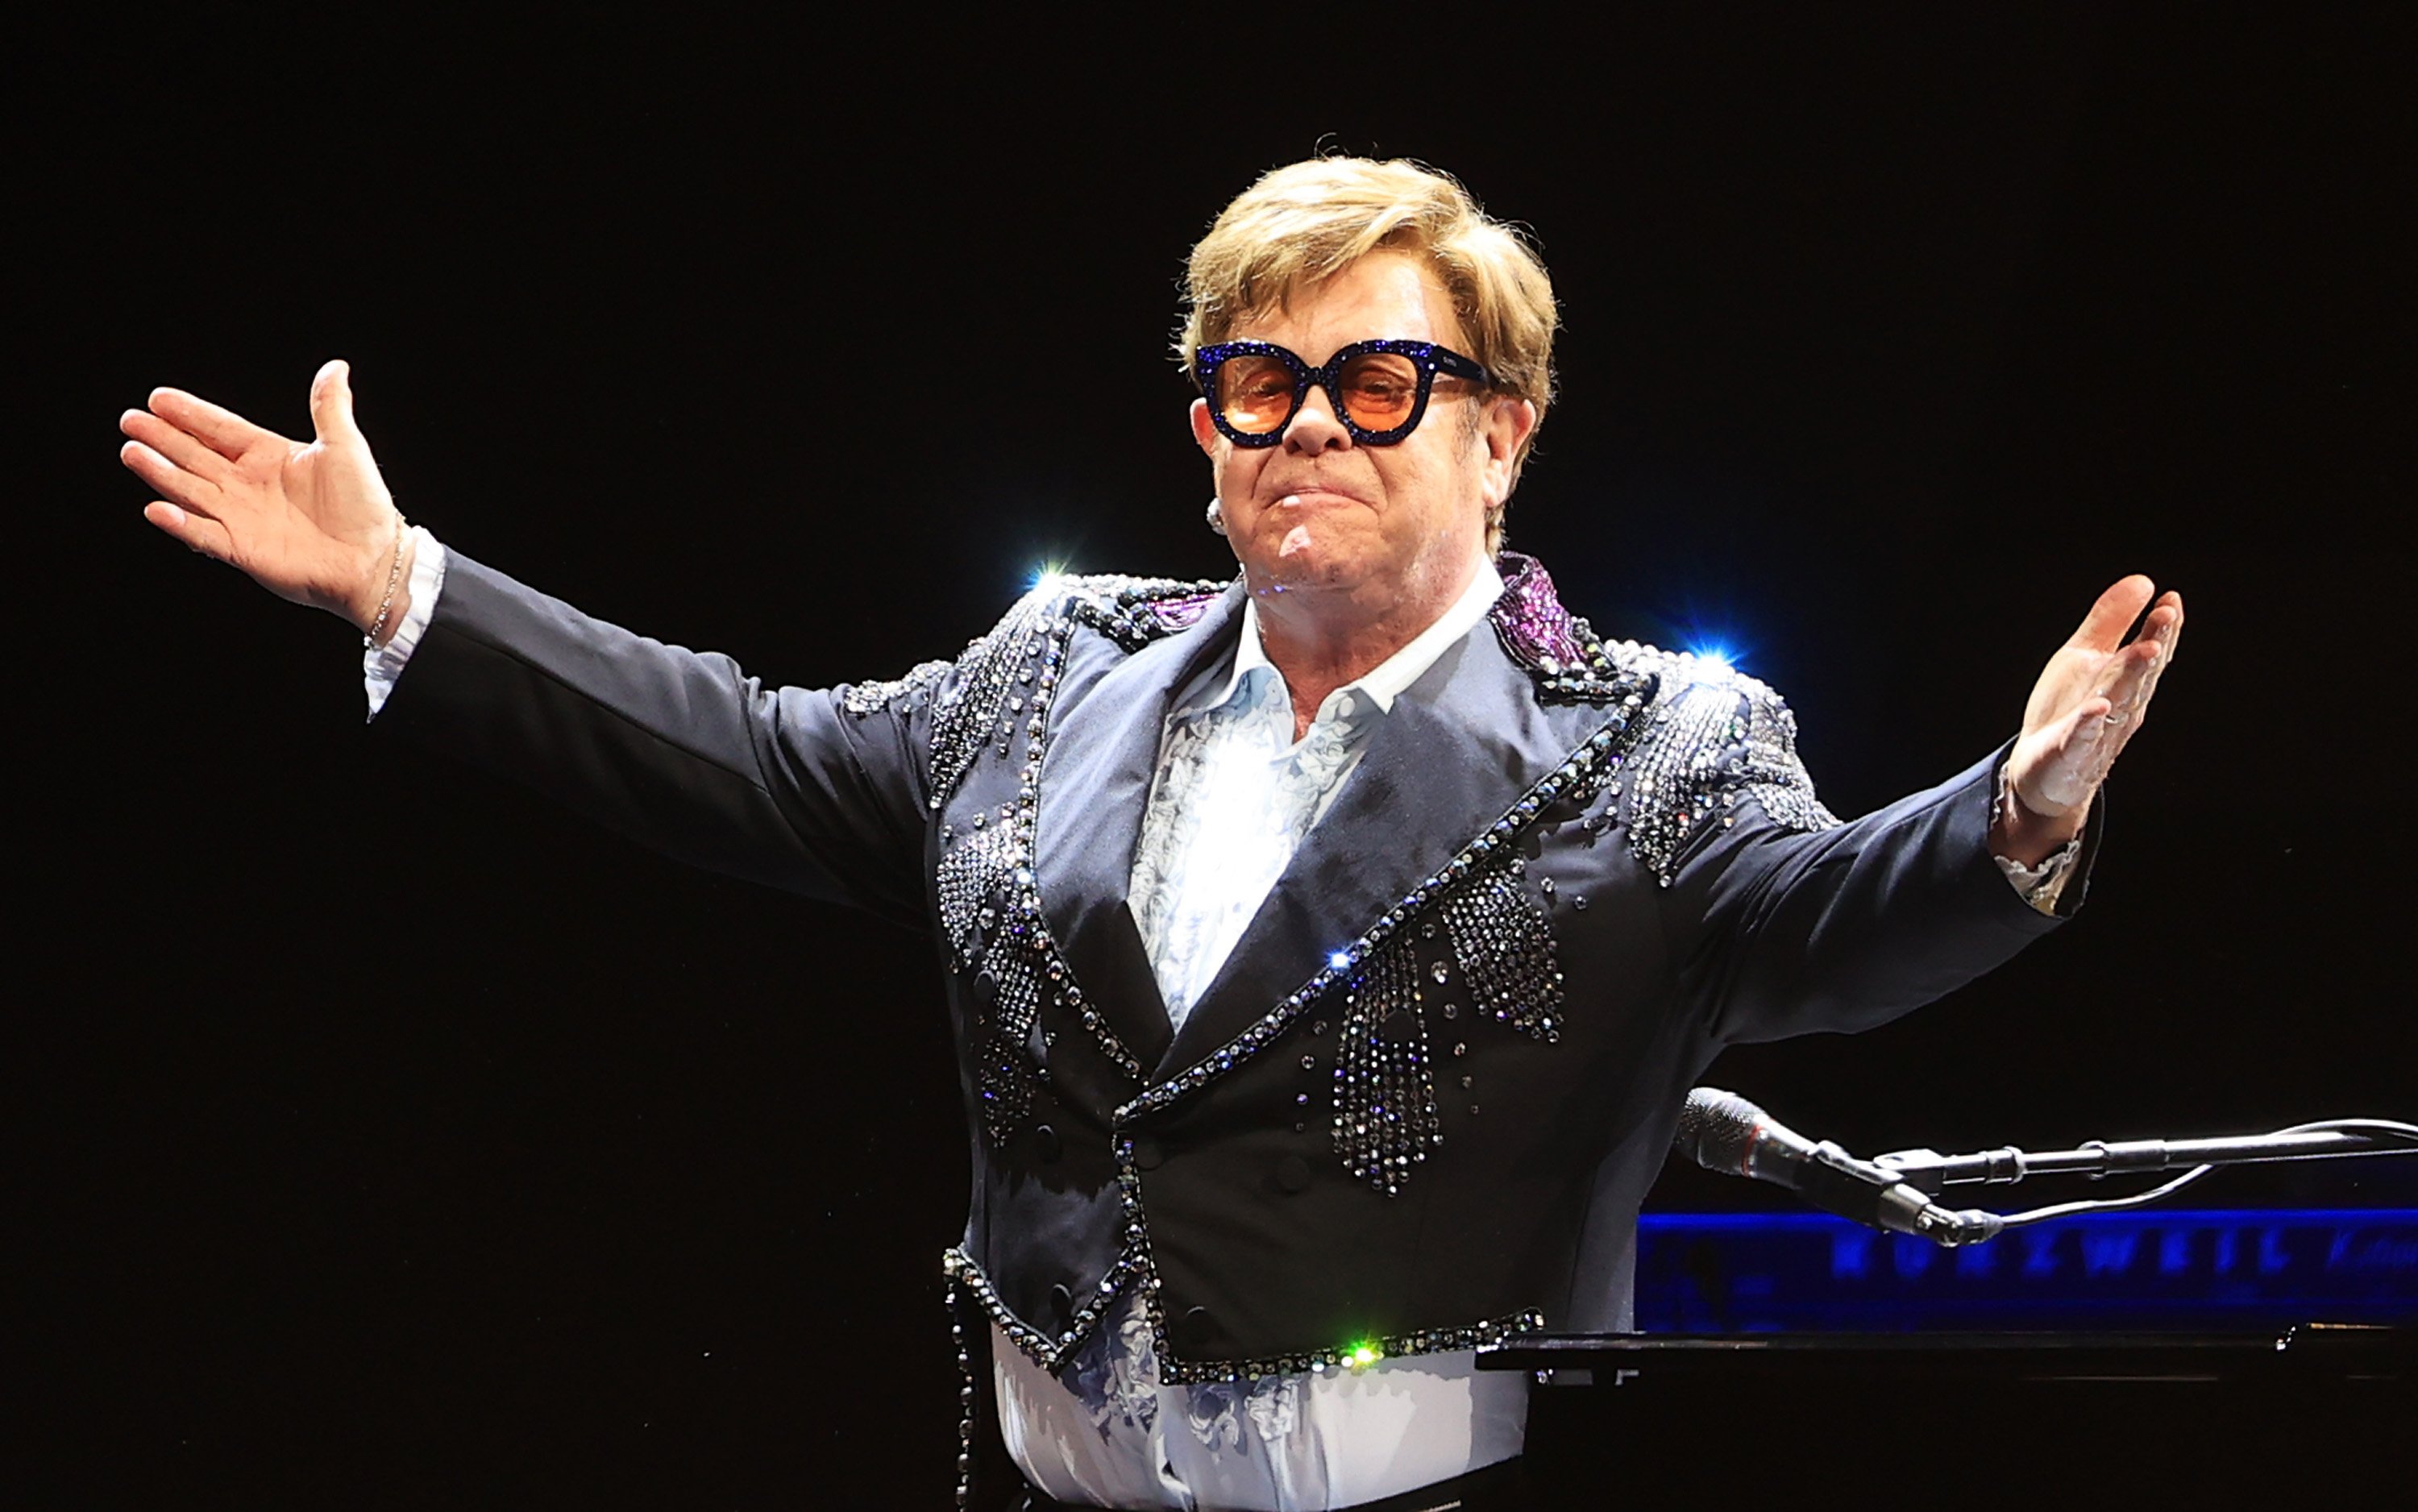 Elton John performs in Liverpool on his 'Farewell Yellow Brick Road'